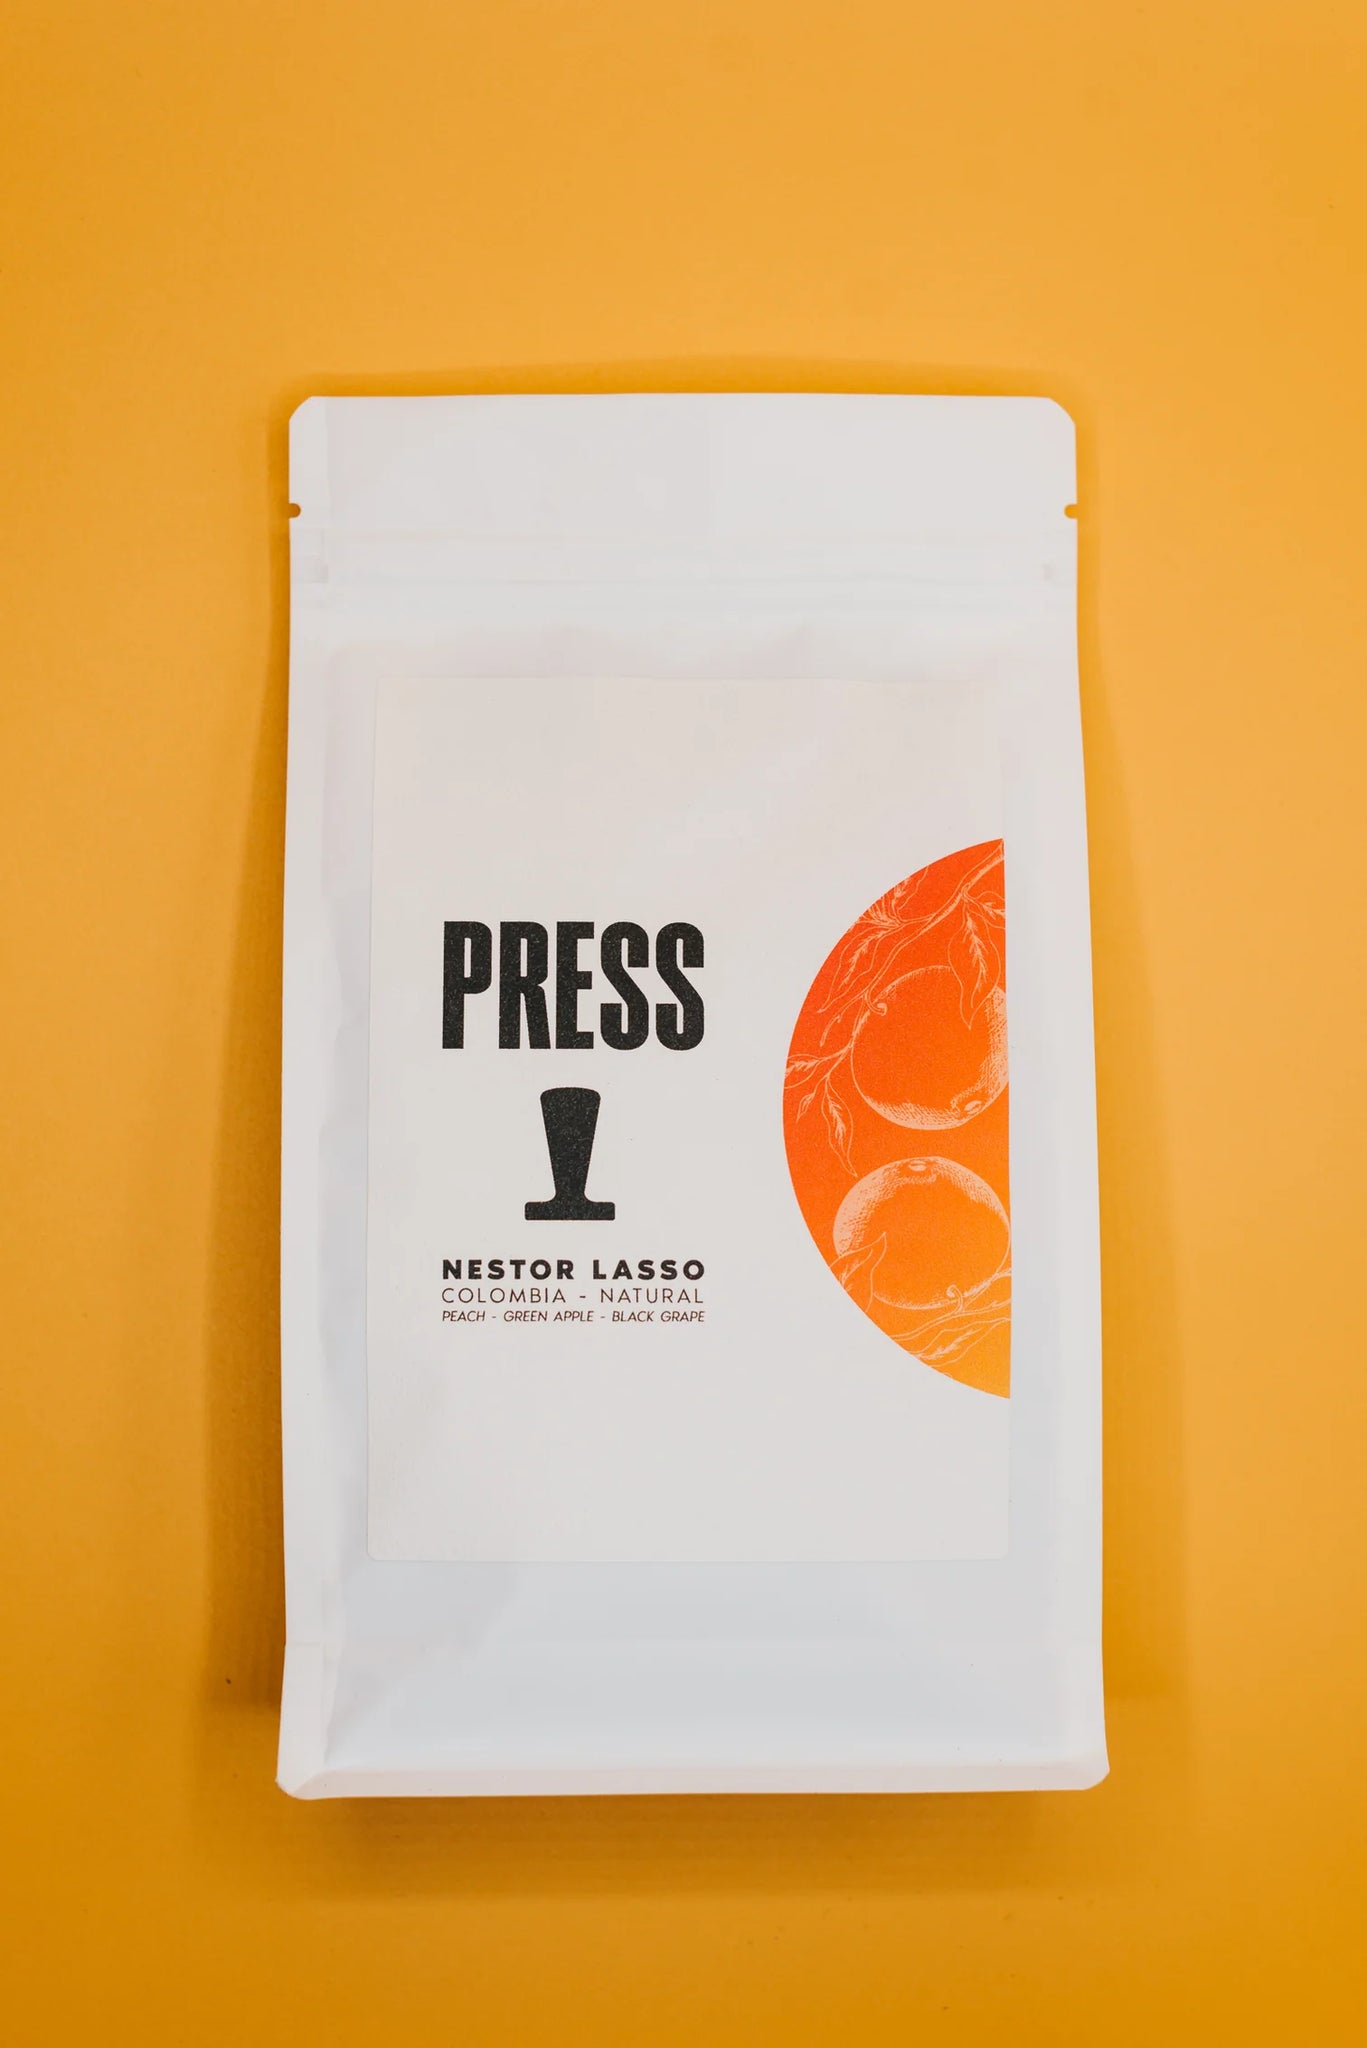 Best colombian coffee by Press coffee and co london